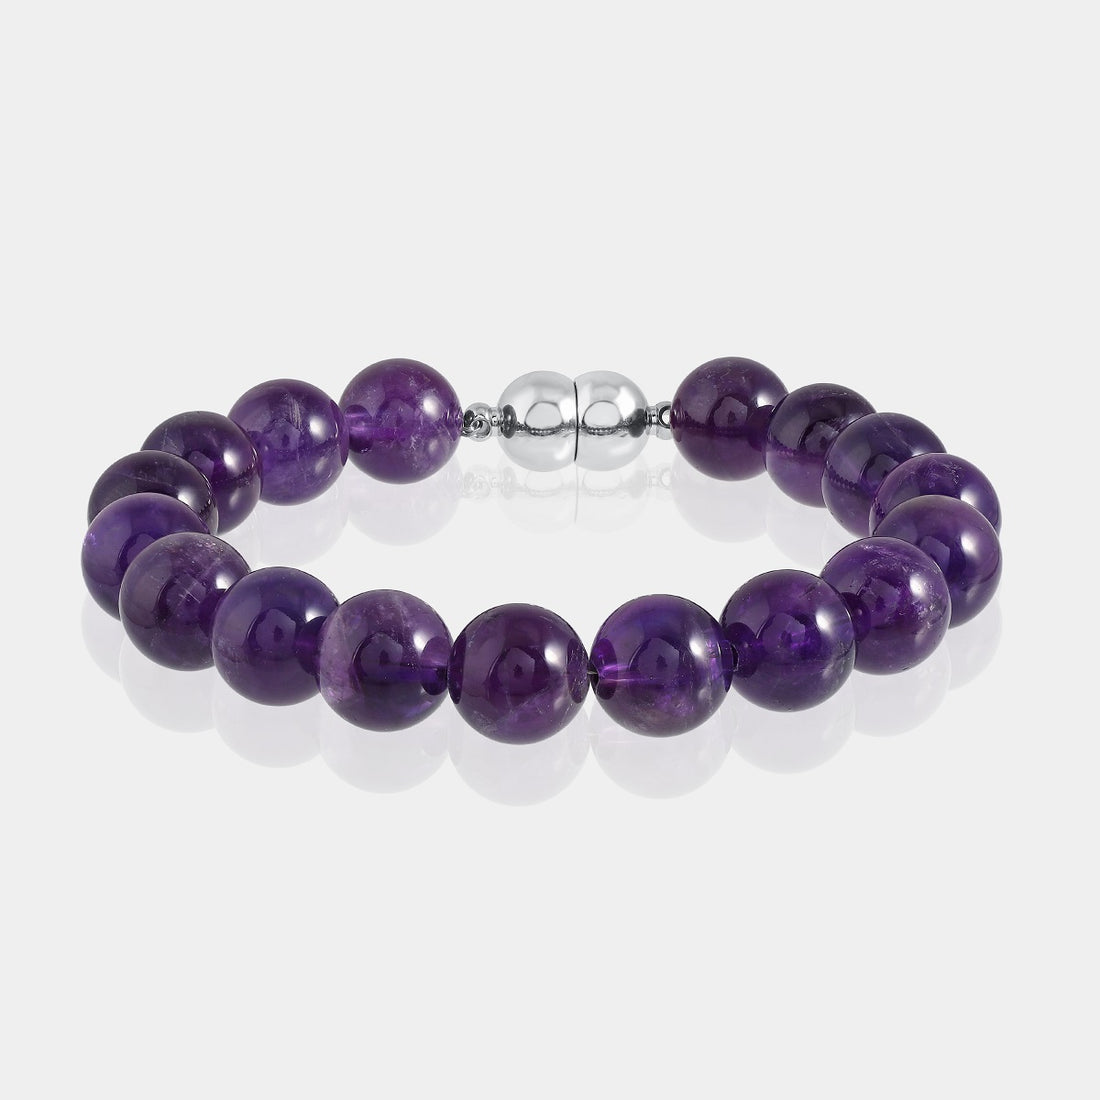 A close-up of a handmade bracelet featuring smooth round amethyst gemstone beads in a rich shade of purple, elegantly strung together